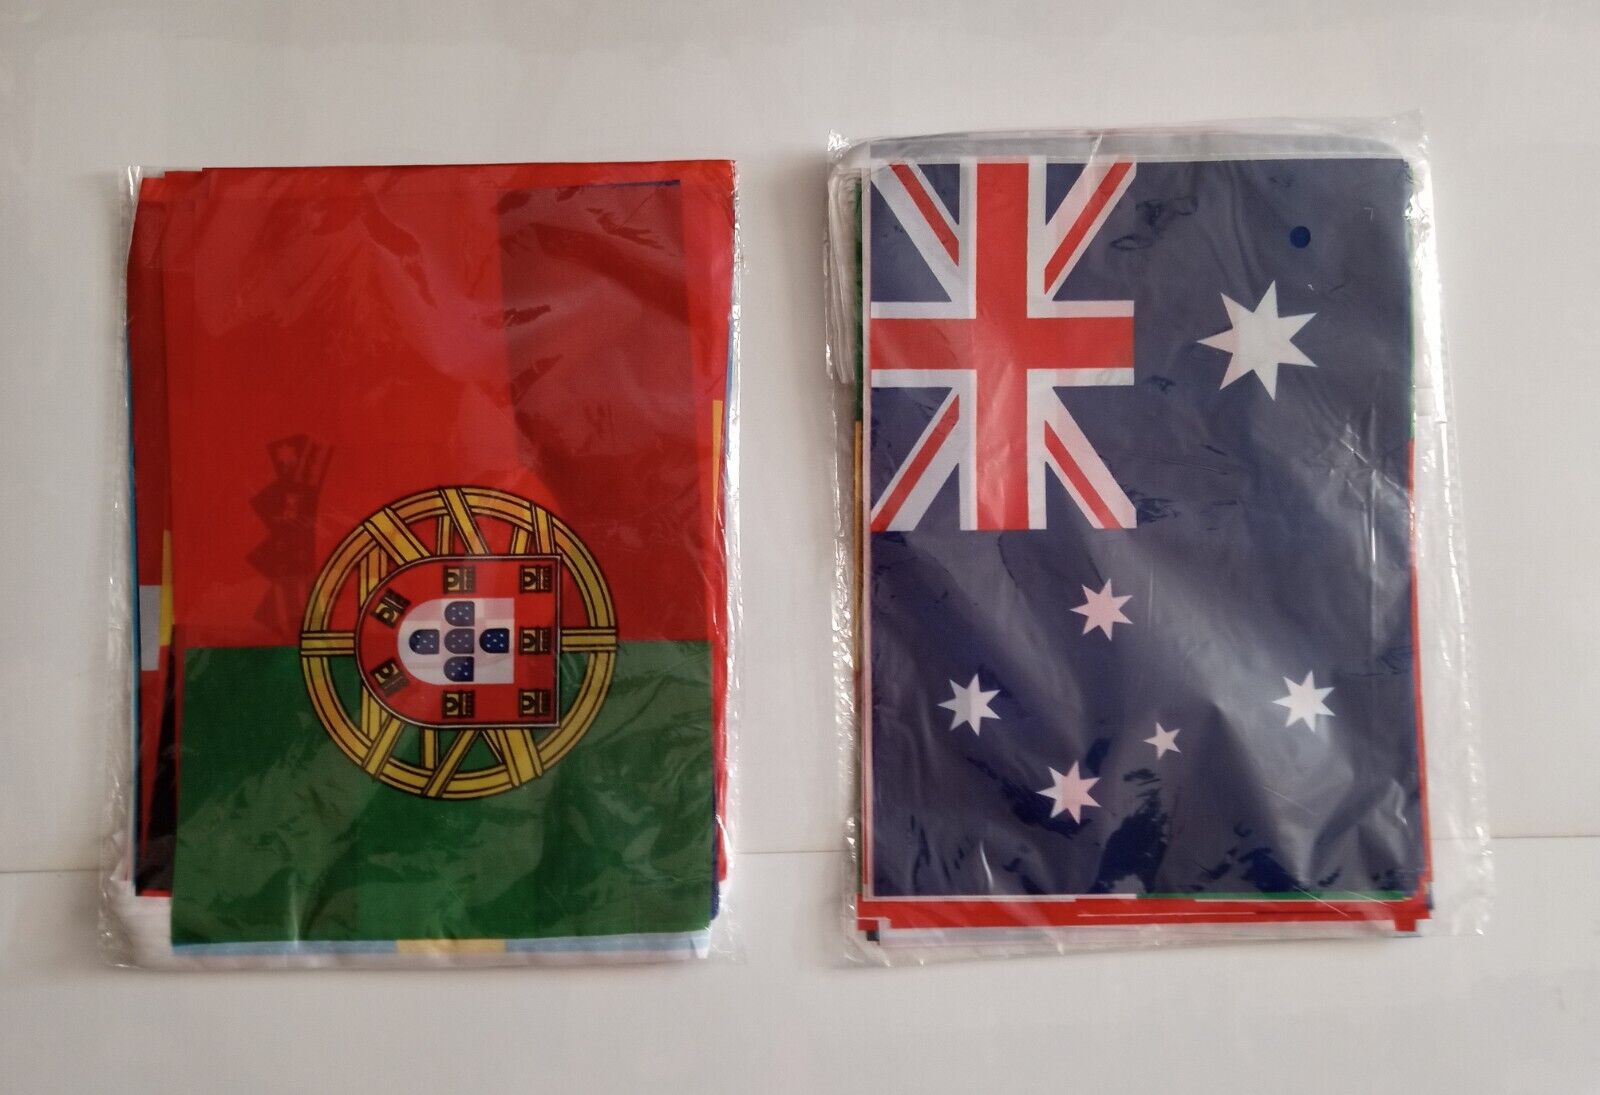 2 EUROCUP 2020 + WORLD CUP 2022 FLAGS ON A STRING SETS FOR $25